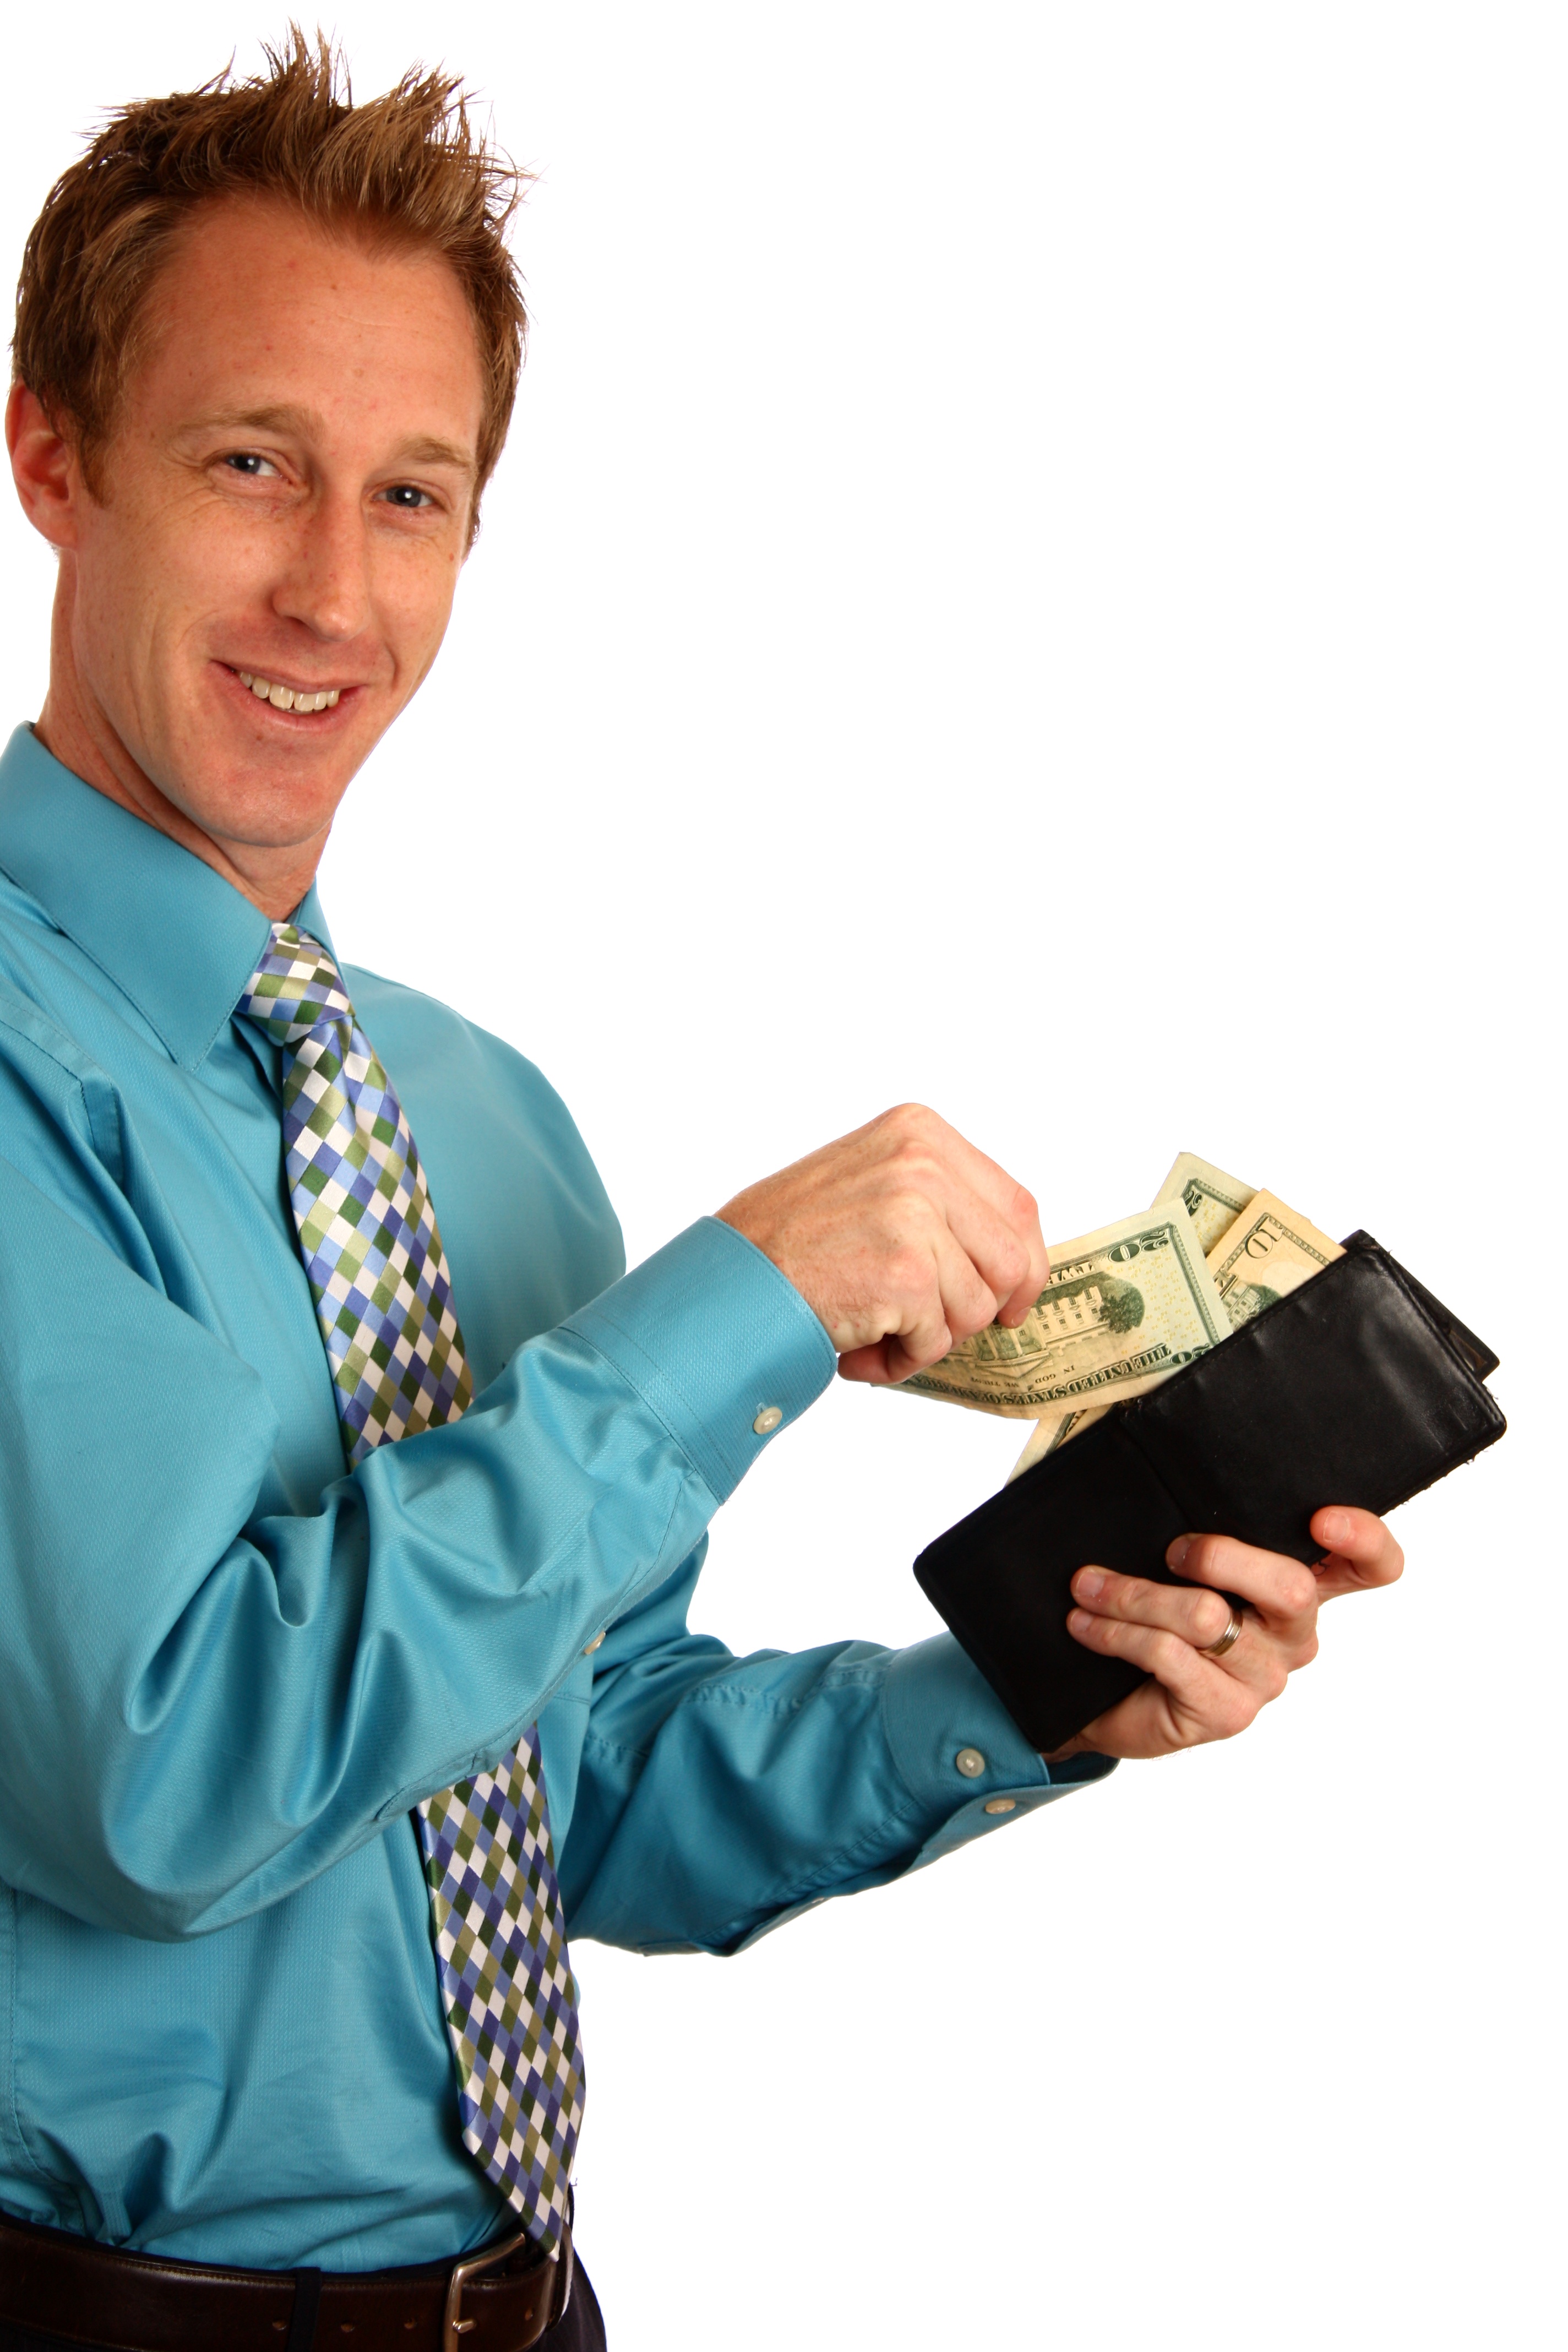 A young businessman holding a wallet, Bills, Objects, Ties, Shirts, HQ Photo